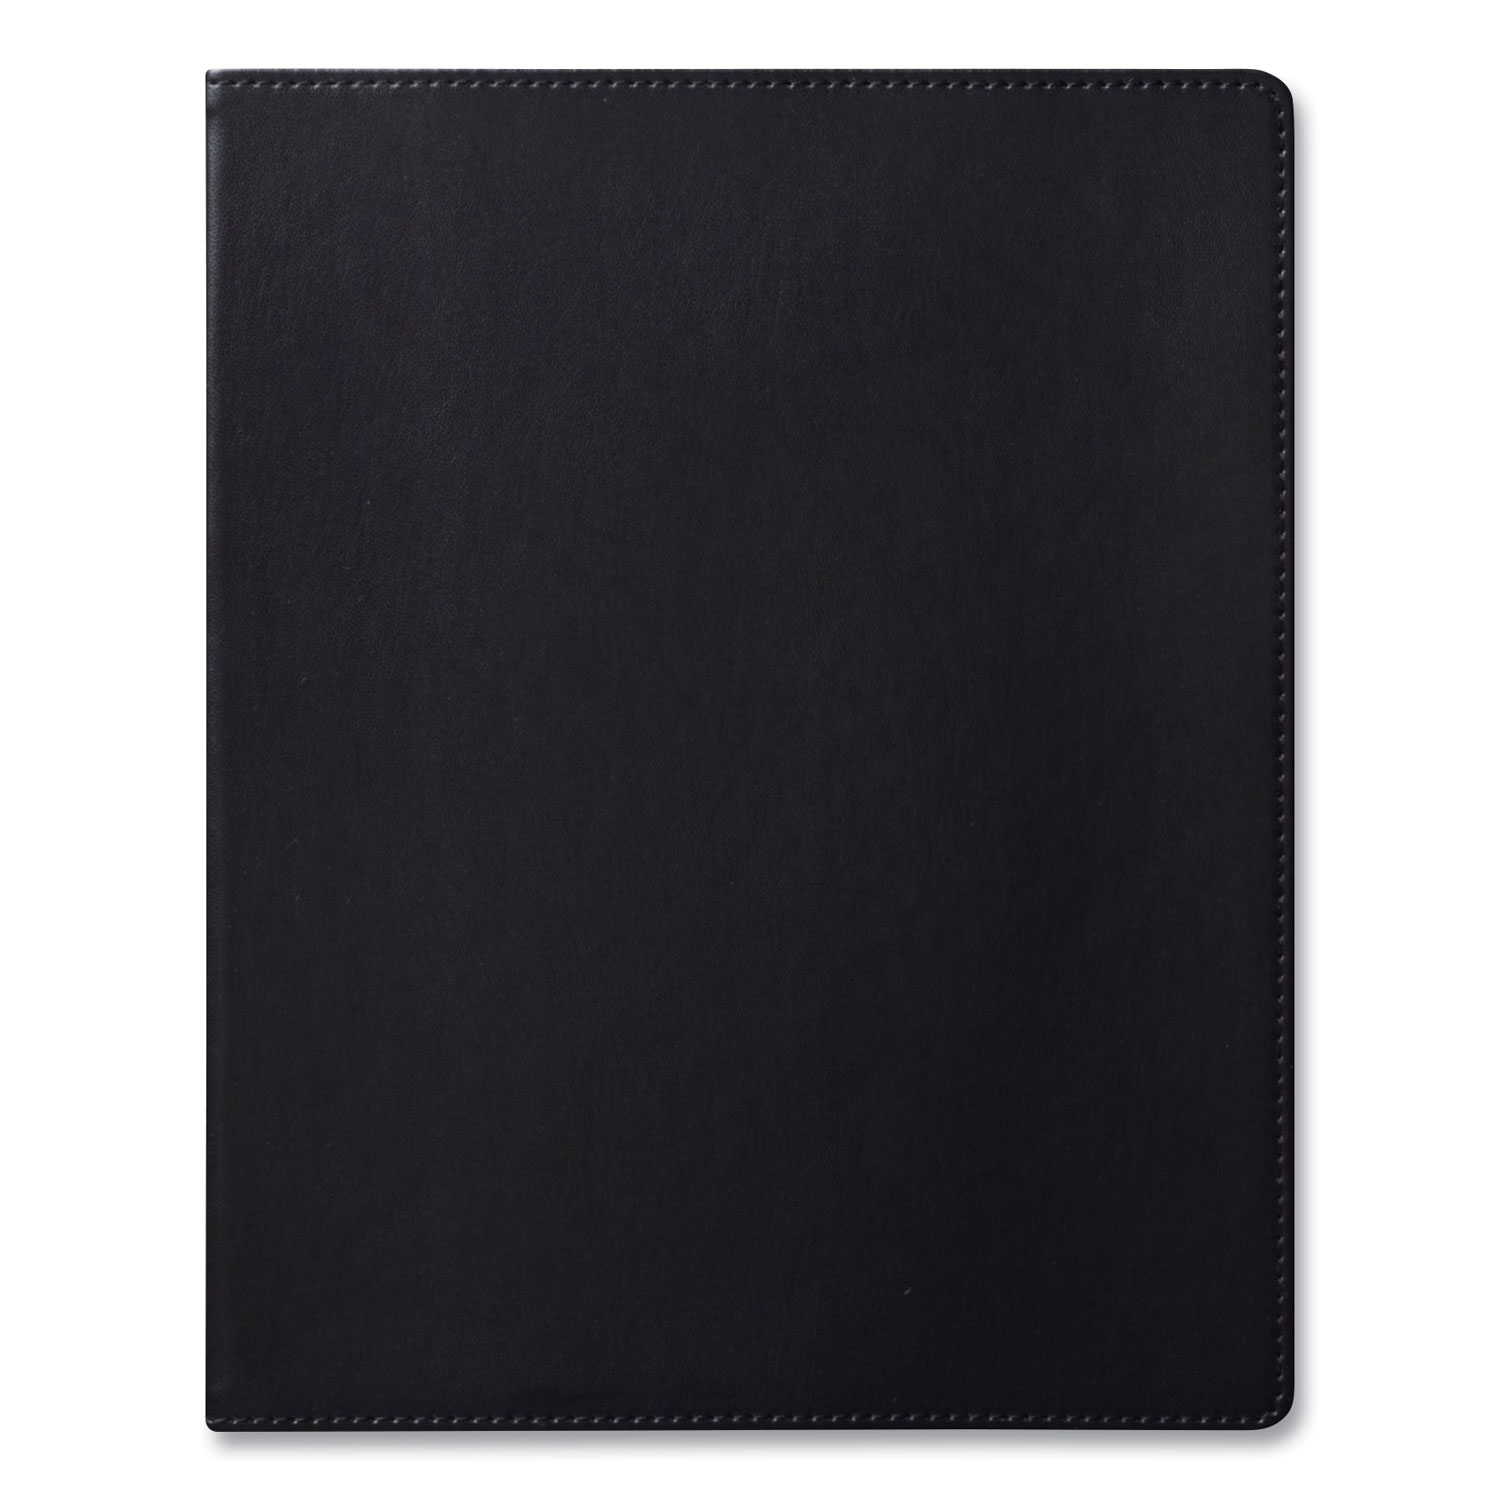 Eccolo Simple Faux Leather Journal, Black, 8 x 10, 256 Ivory Pages